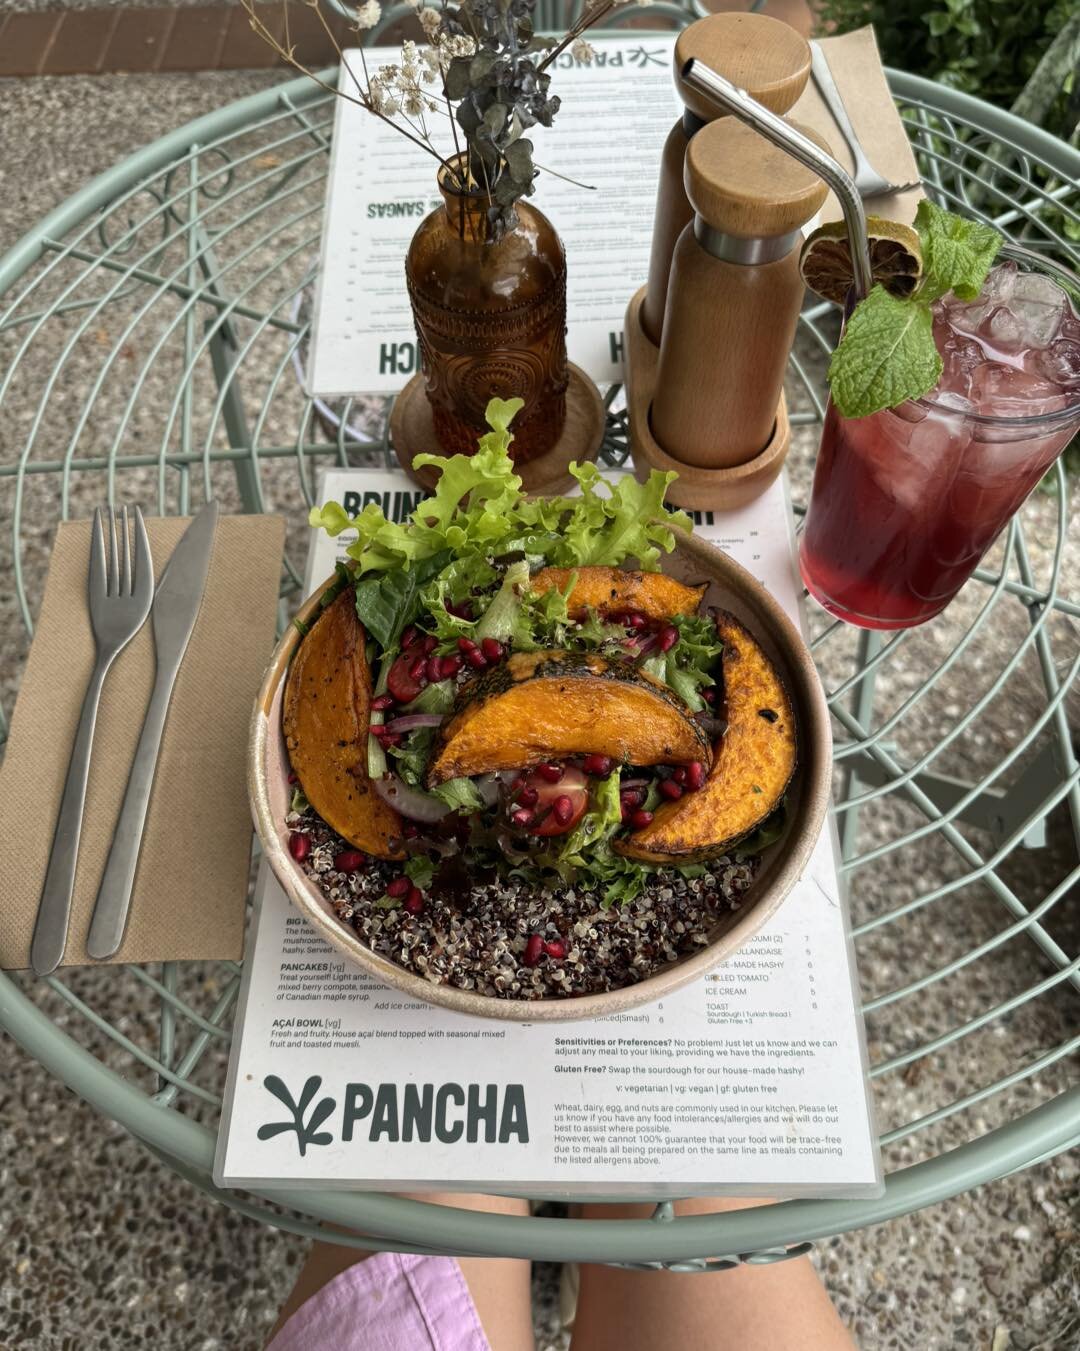 Trying to be healthy is easy when it tastes this good 👌 
Roast Pumpkin &amp; Quinoa Salad with our Organic Mulberry House-Made Soda 
.
.
.
#brisbanecafe #cafe #lunch #brisbanelunch #salad #vegan #veganbrisbane #glutenfree #glutenfreebrisbane